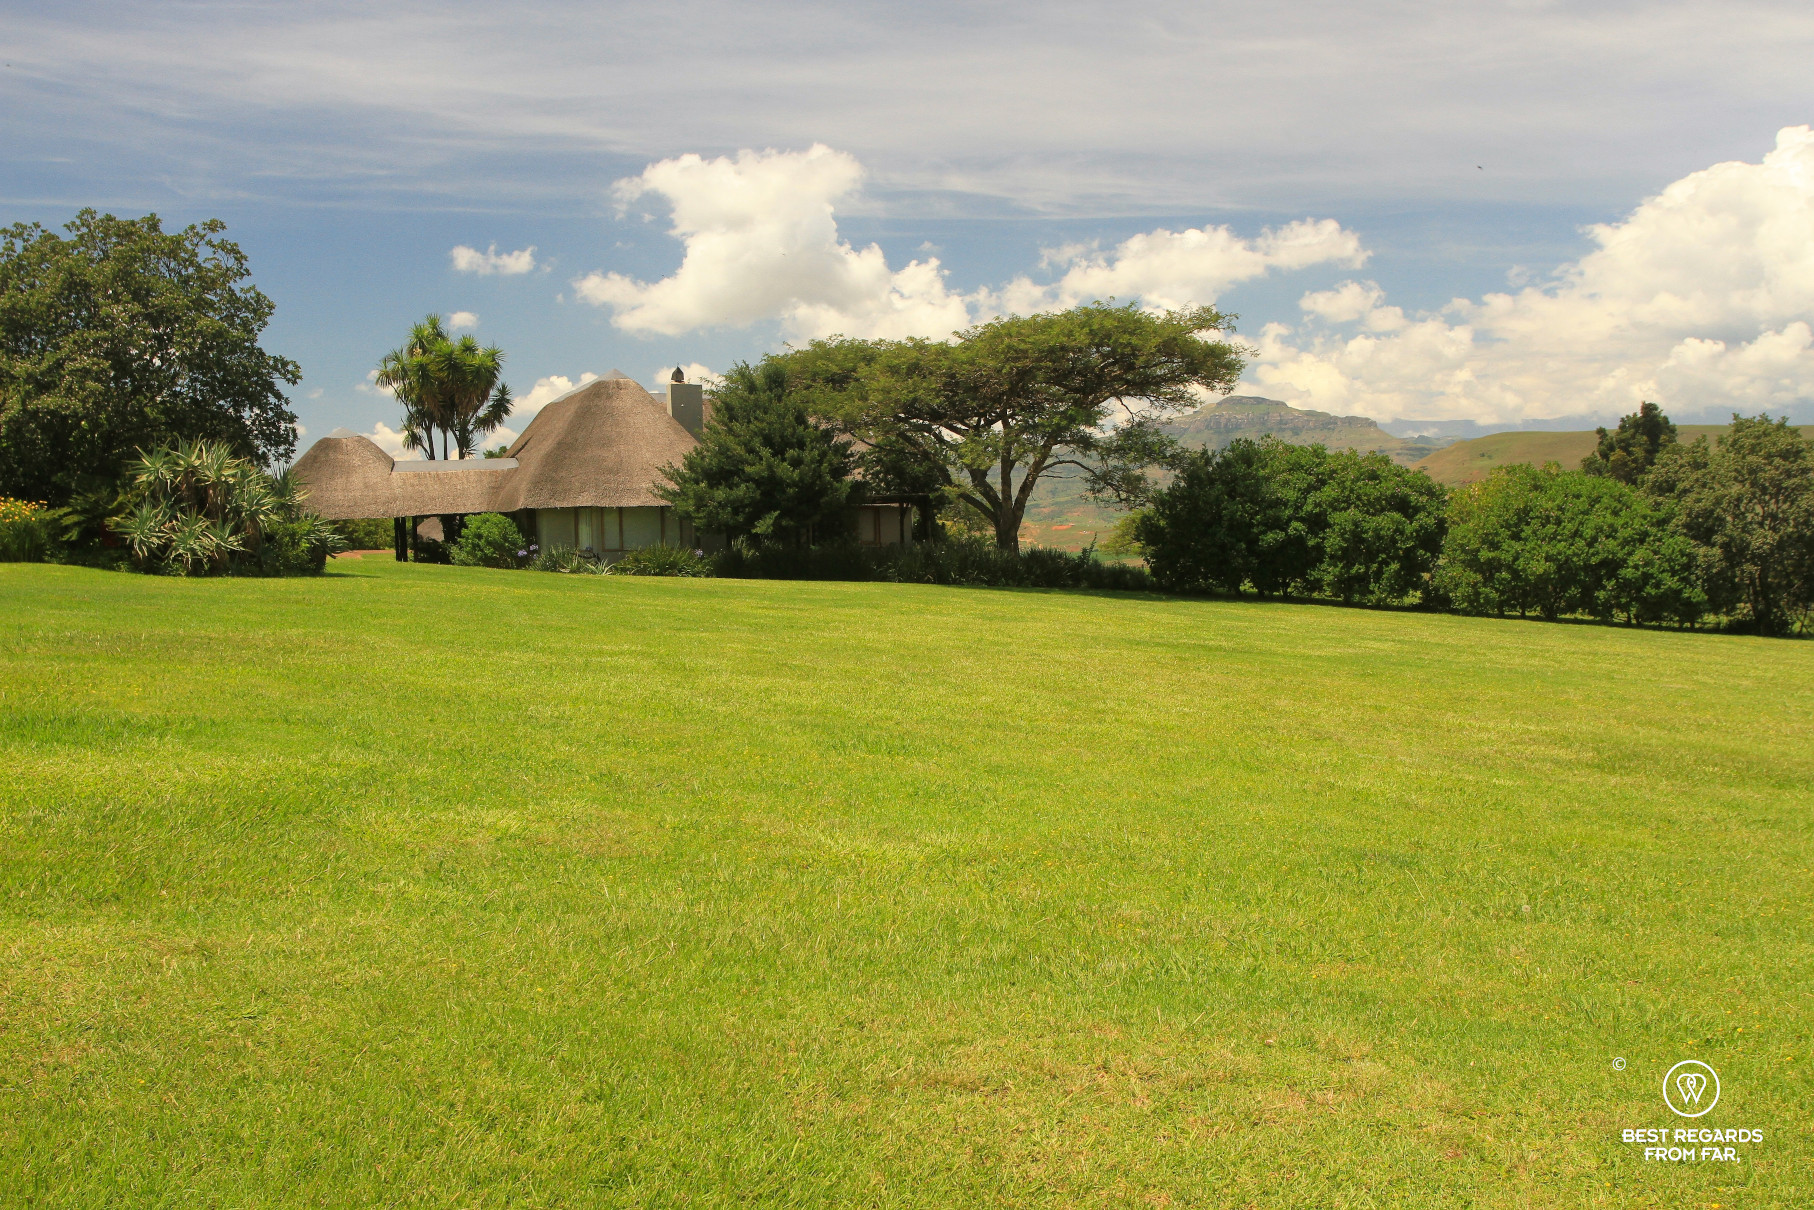 The thatched roofs of the Montusi Mountain Lodge, Drakensberg